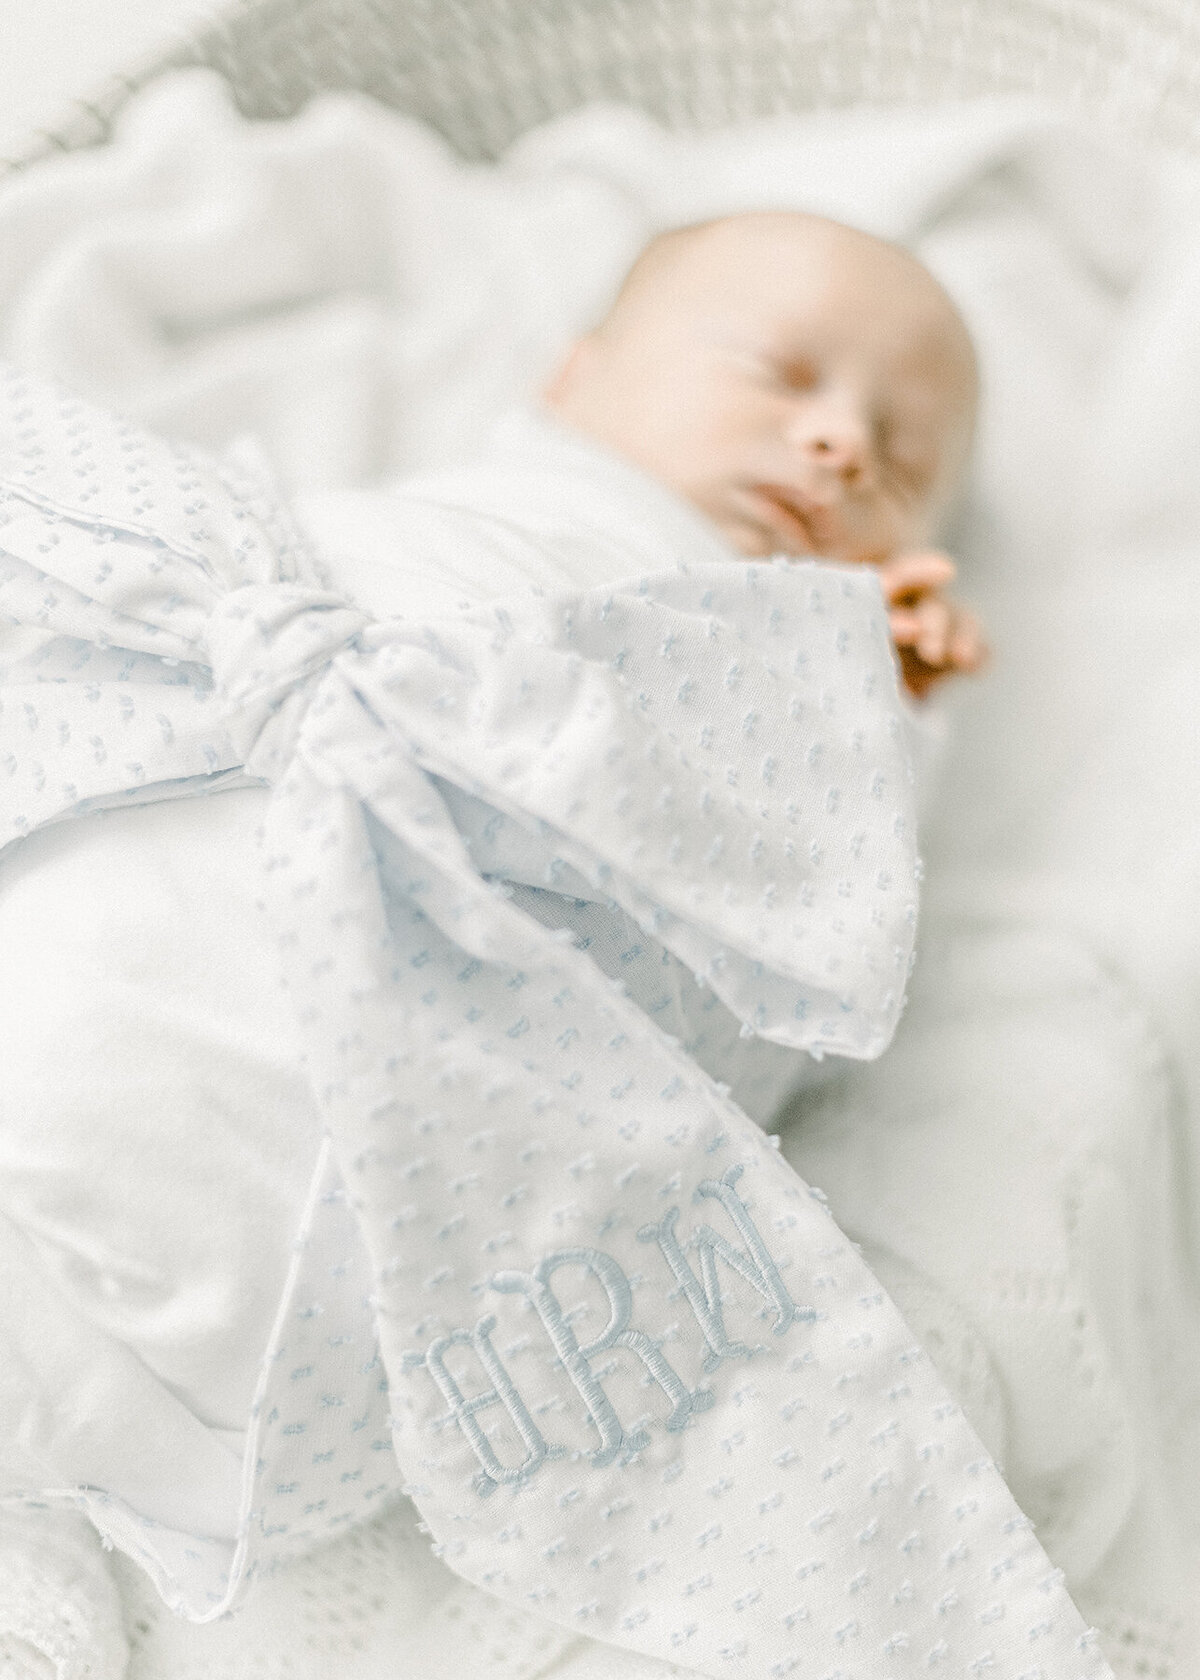 Newborn baby boy laying in a basket swaddled and tied with a light blue bow as he sleeps in a basket on the floor of a DFW photography studio.